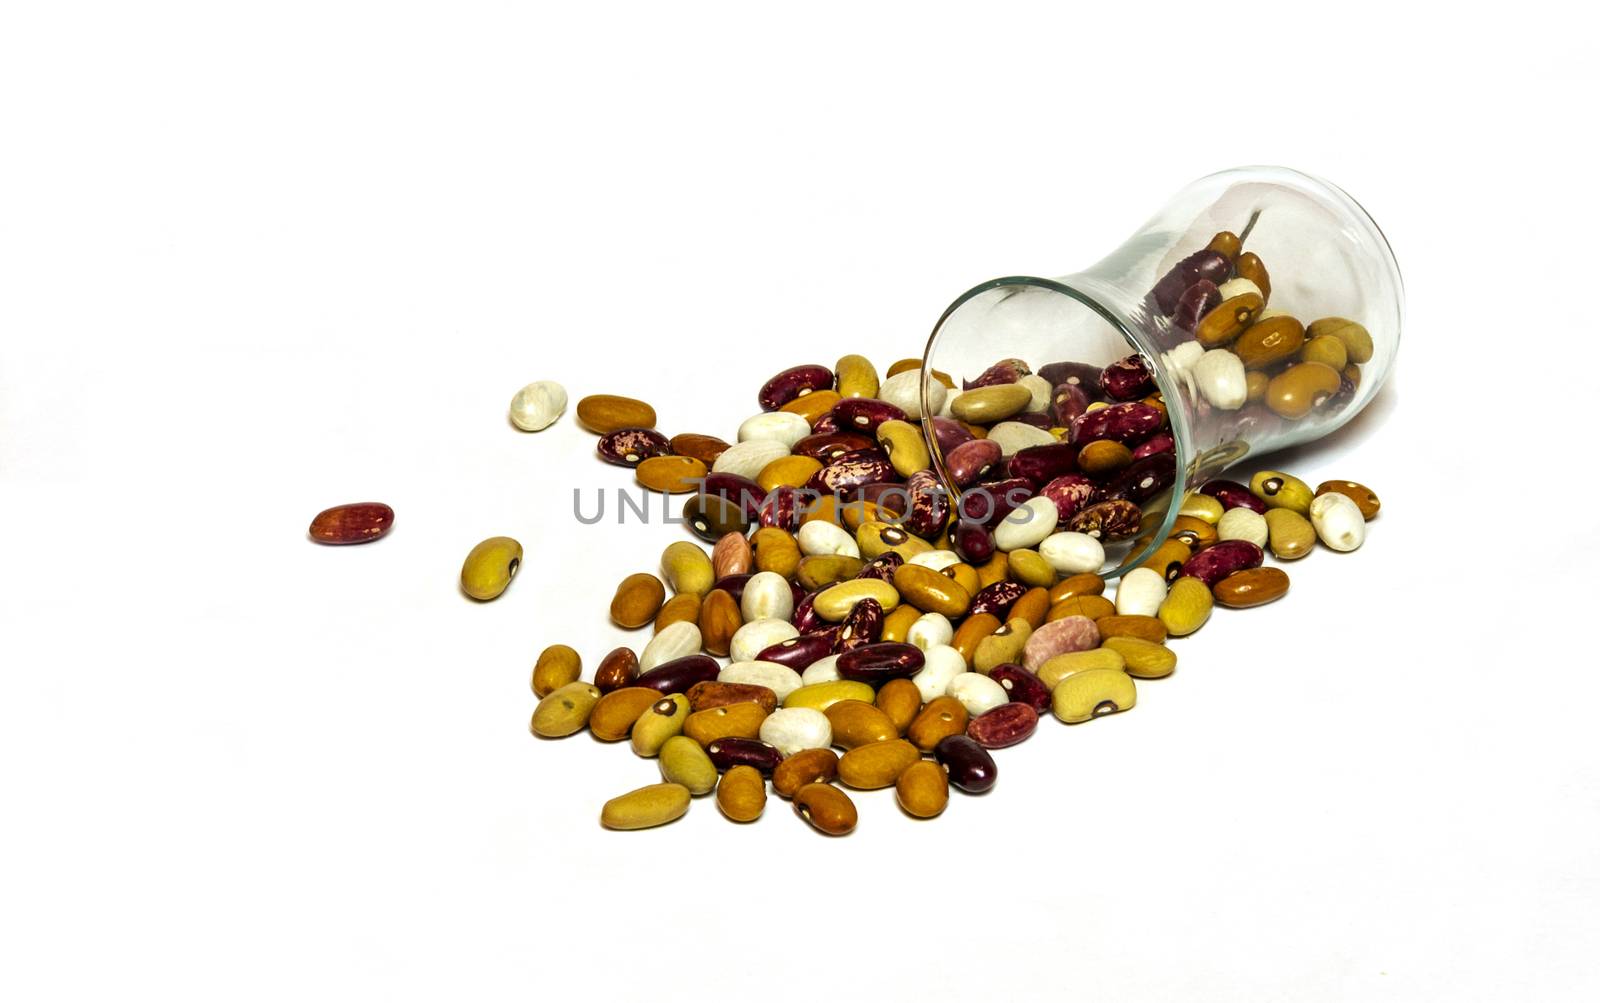 Beans beans scattered from a glass beaker on a white background by Grommik